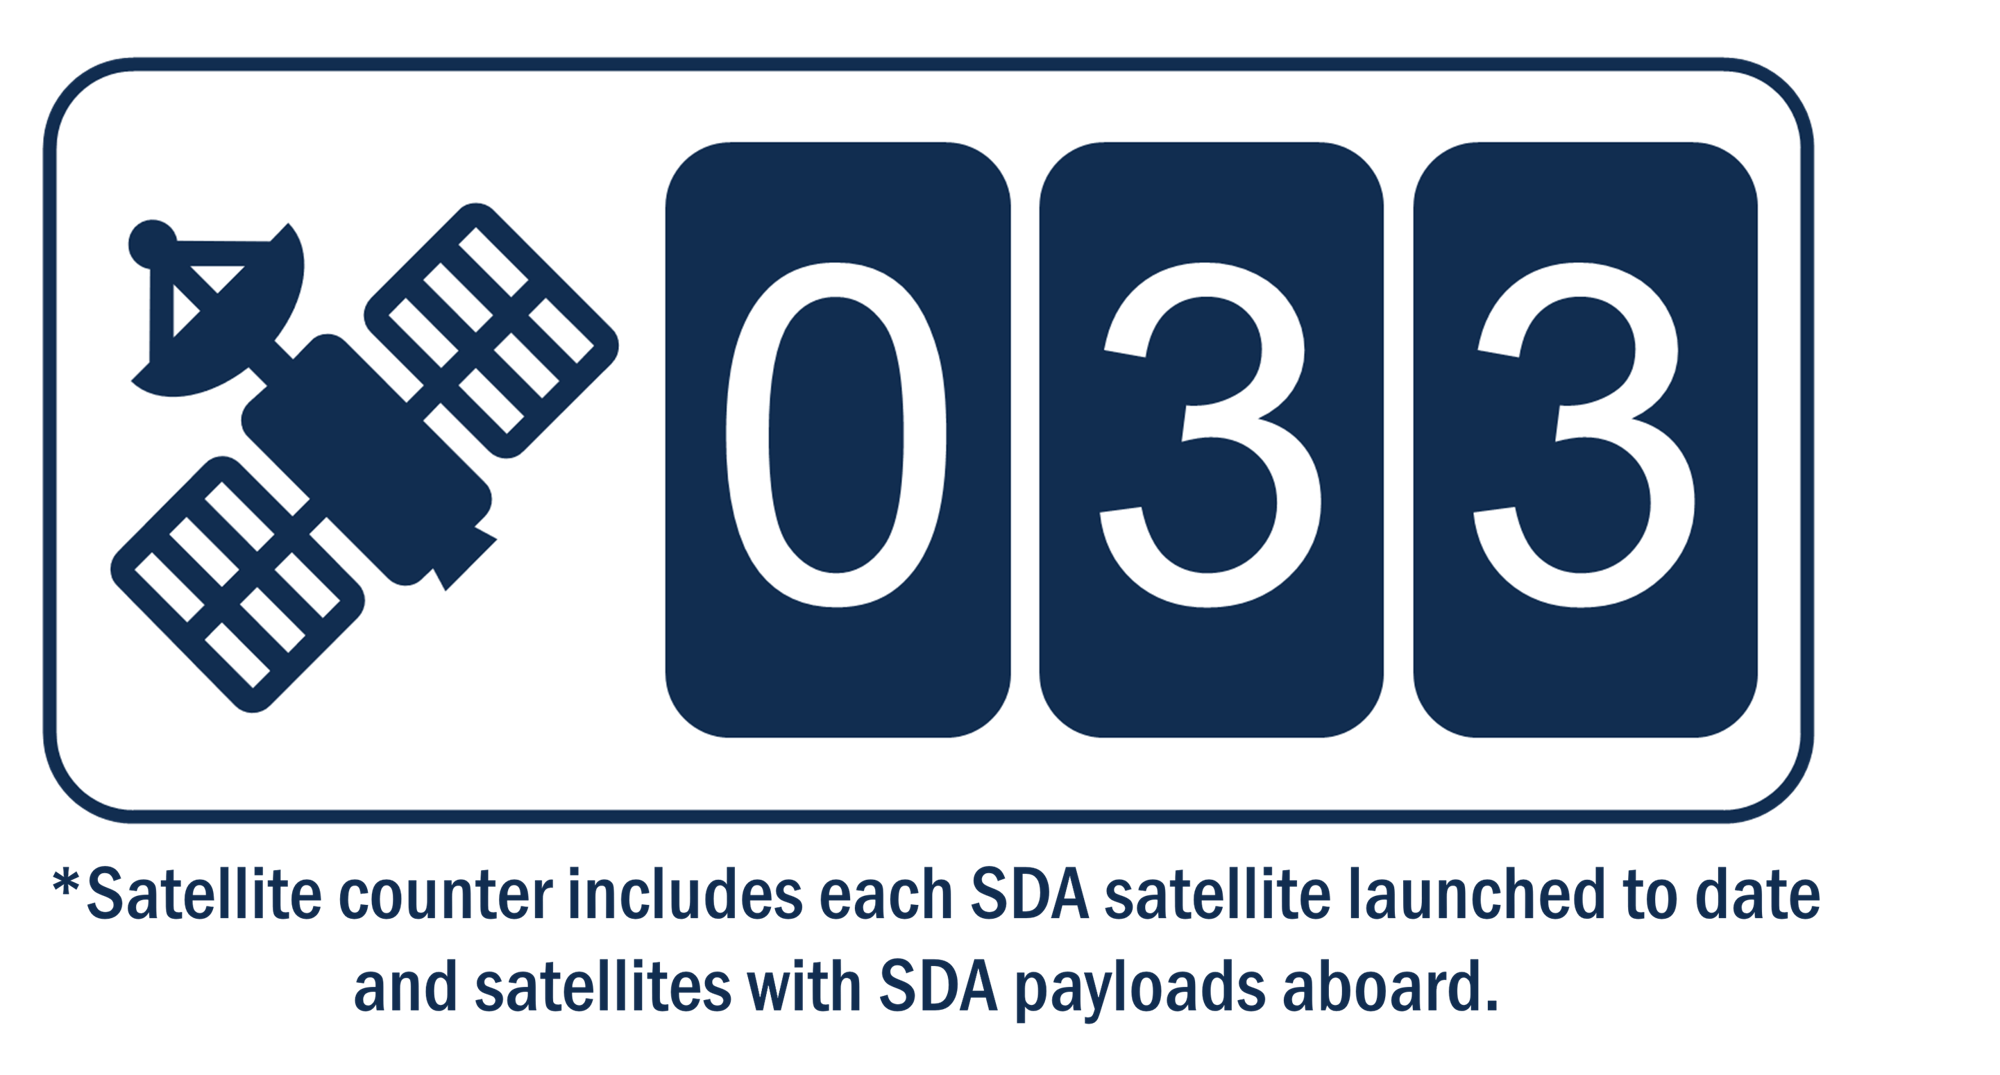 33 satellites on orbit; satellite counter includes each SDA satellite launched to date and satellites with SDA payloads aboard.